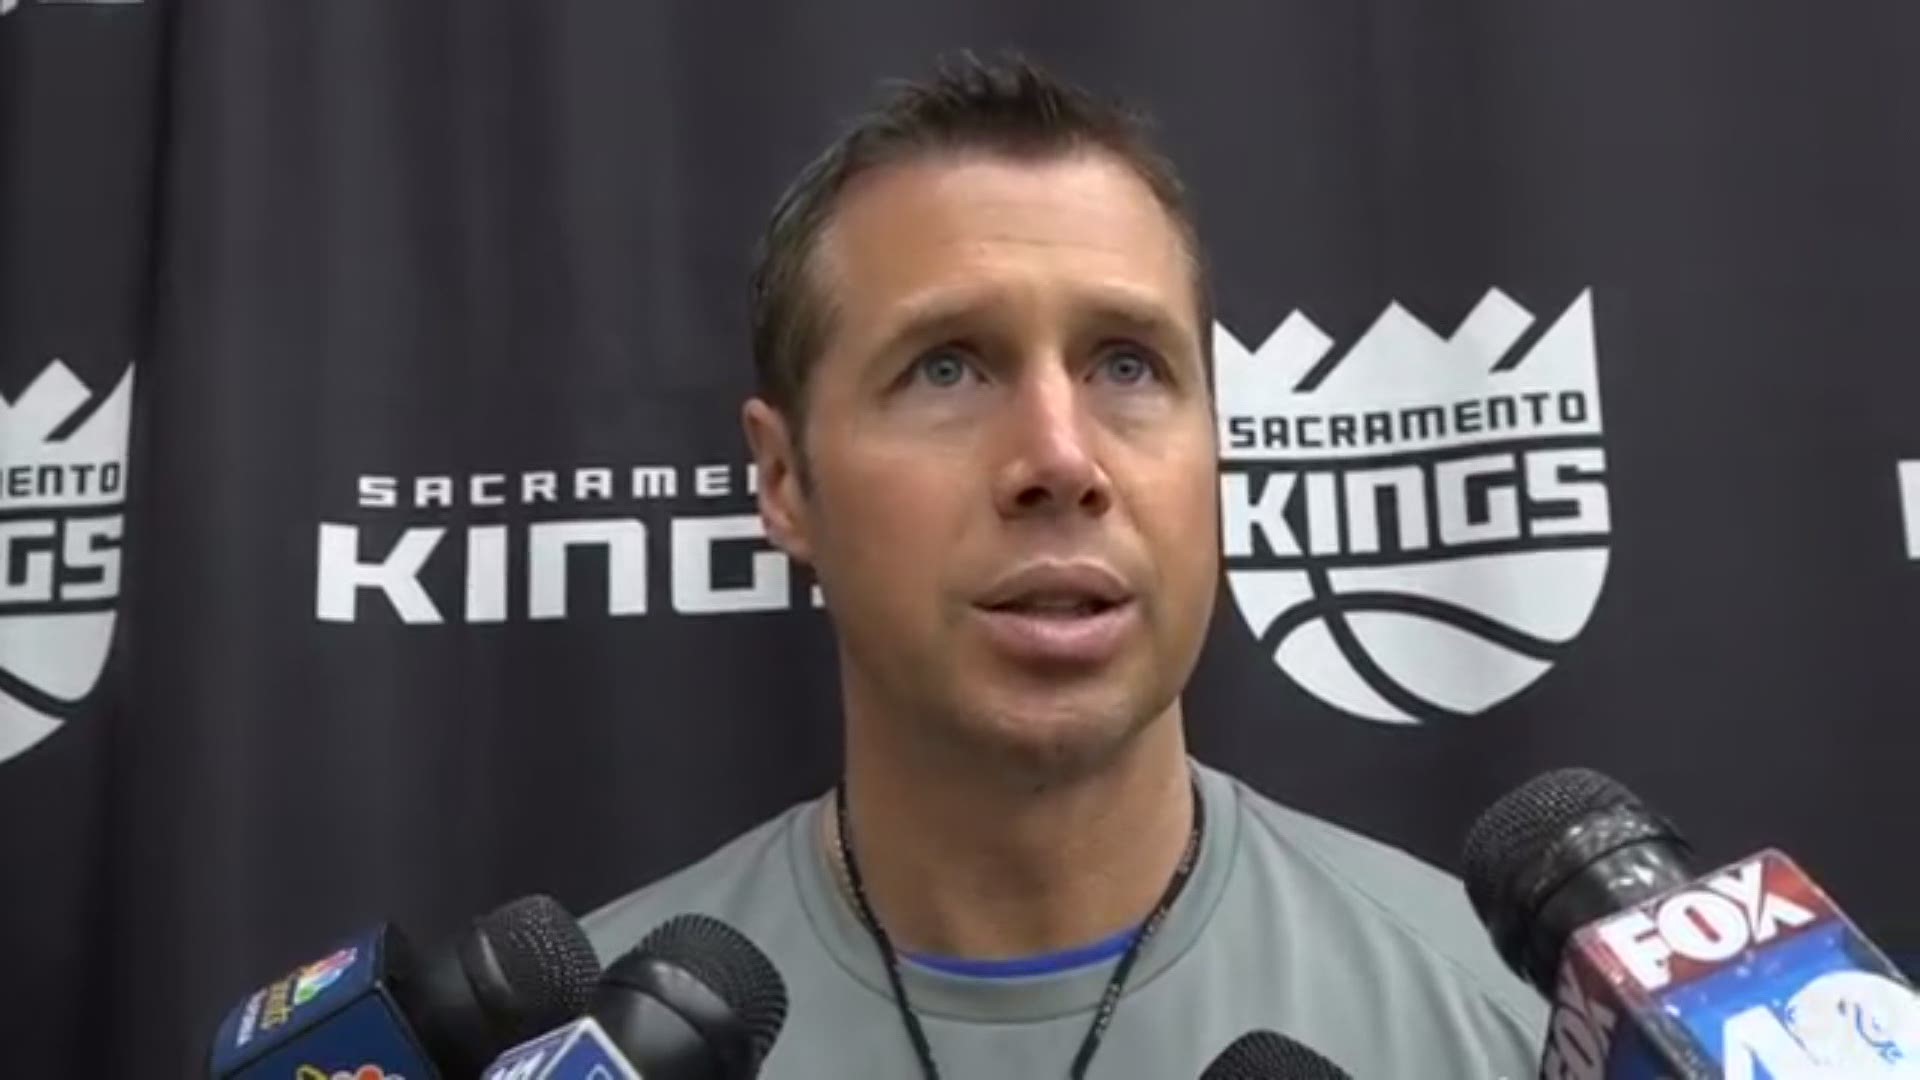 Sacramento Kings head coach Dave Joerger talks about his team's quest for the playoffs with 25 games remaining before the season ends and it all beginning on Thursday in Oakland against the Golden State. He also discusses his former player DeMarcus Cousins ans the impact he's made with the Warriors.